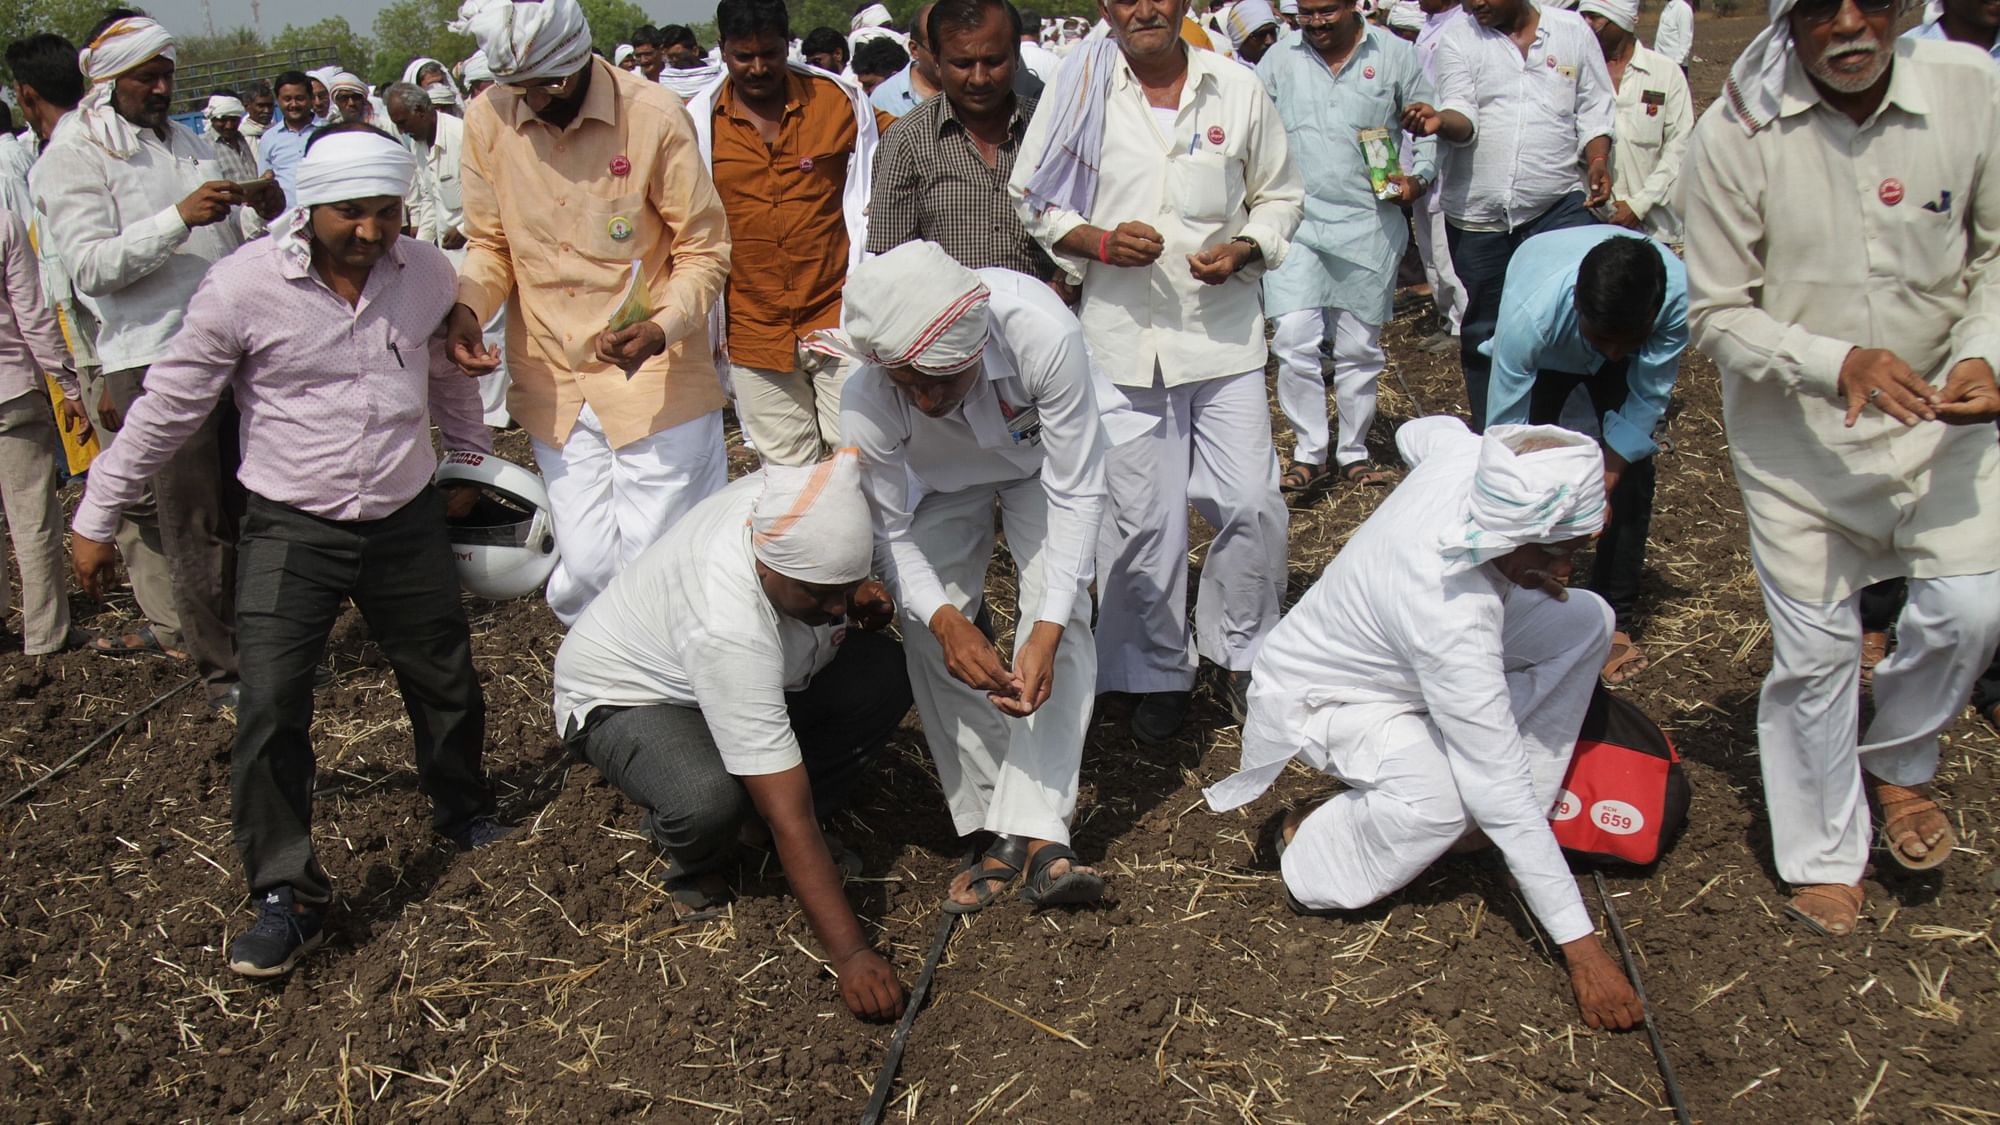 Farmers sowing Ht cotton seed, defying the law.